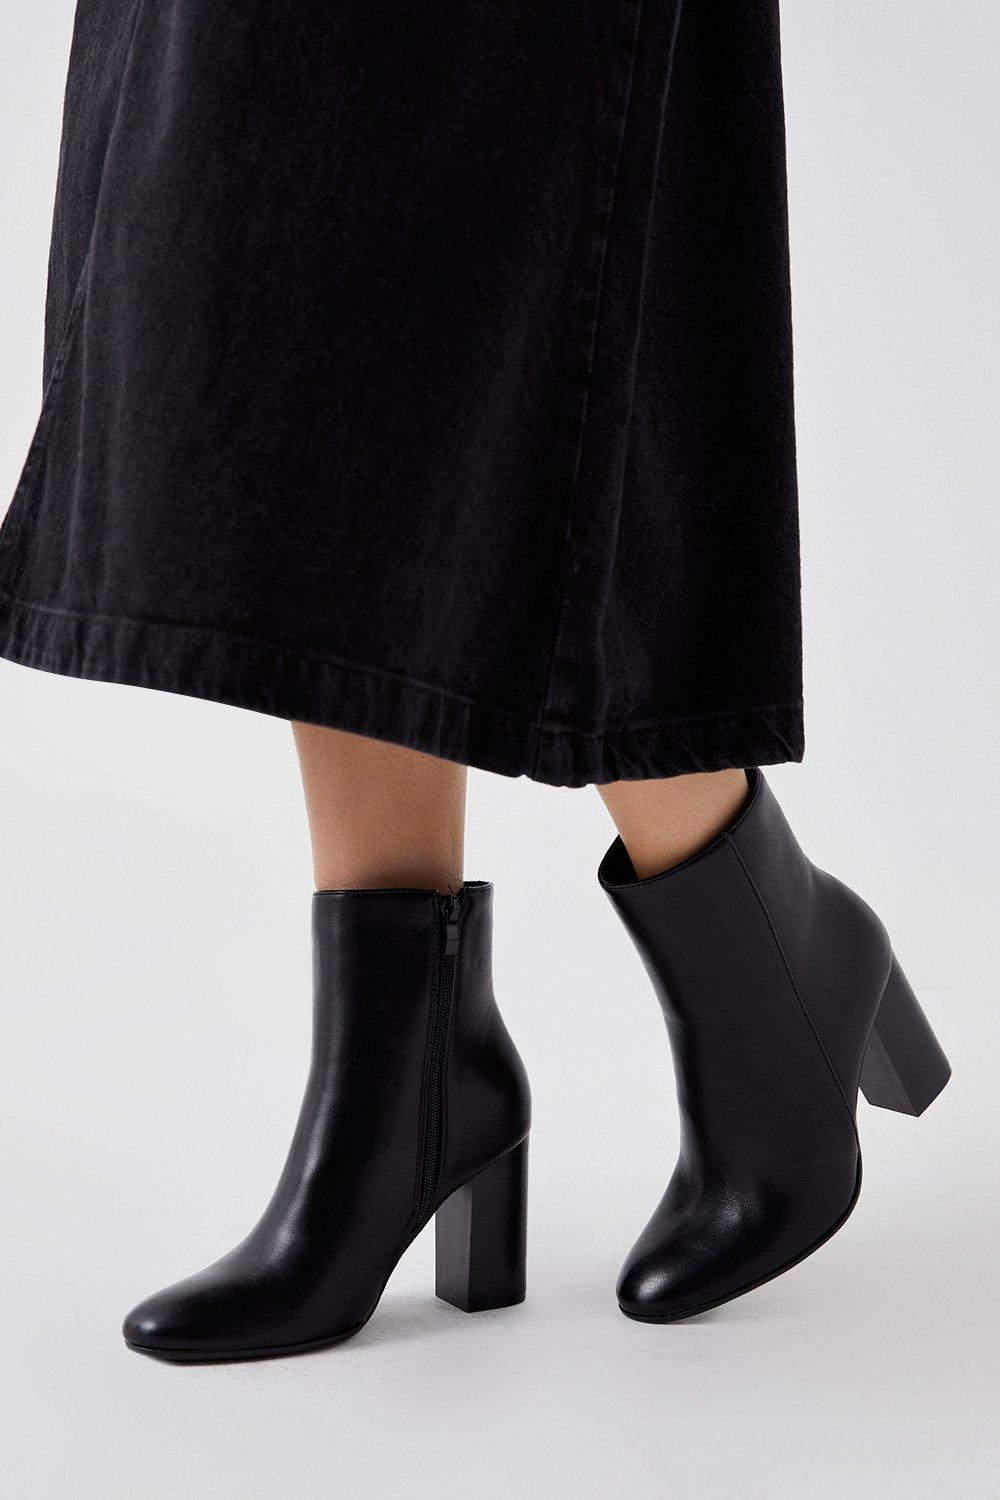 Round Toe Stacked Heel Ankle Bootsblack